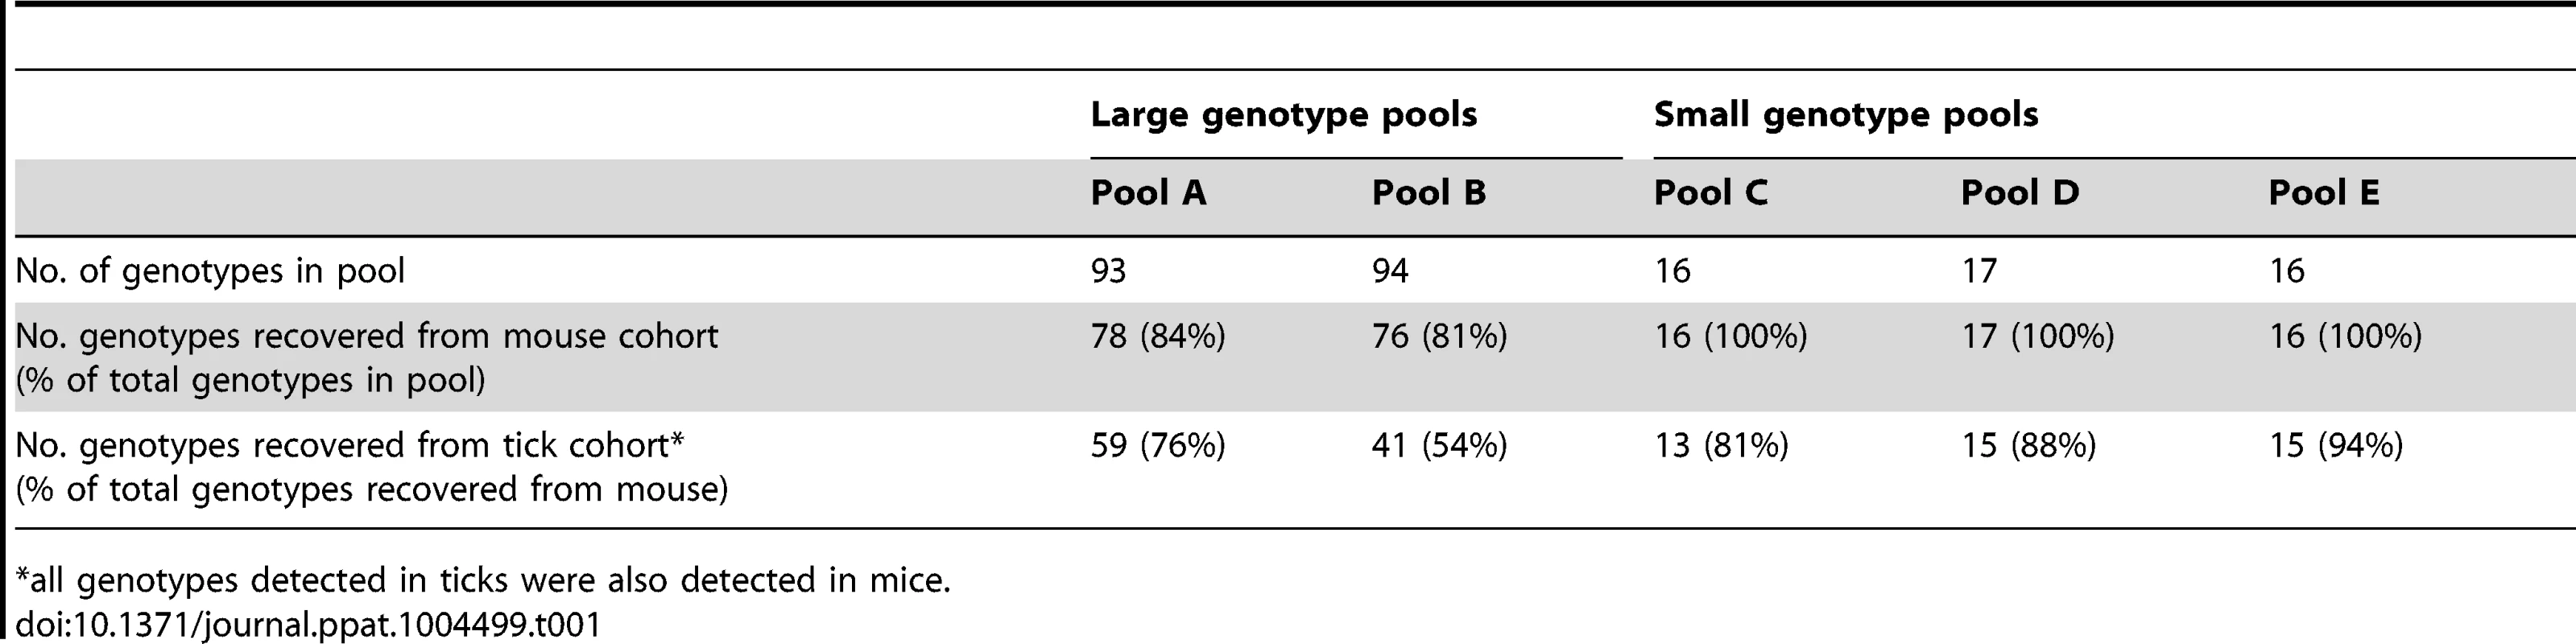 Recovery of <i>F. novicida</i> genotypes from populations of mice and ticks exposed to large- or small-pool genotype populations.